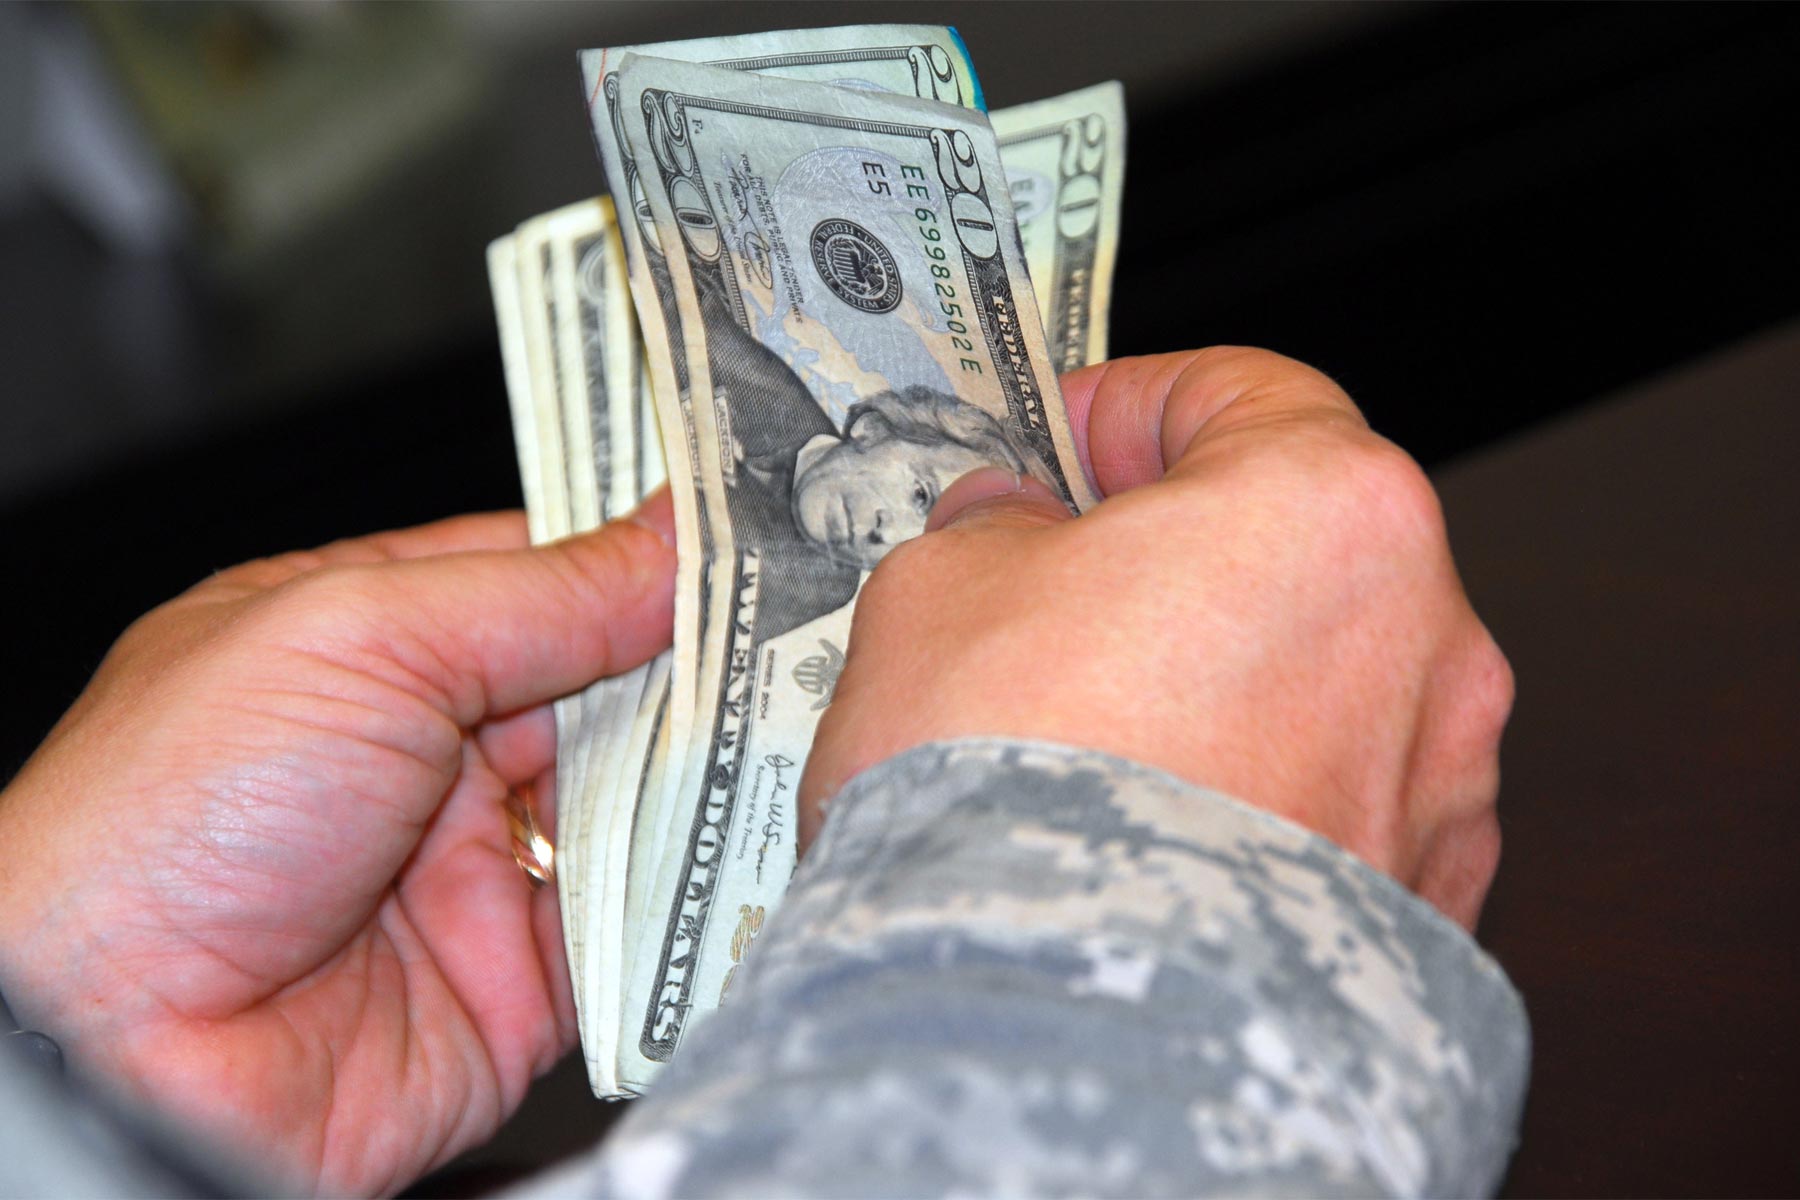 2019-military-pay-raise-amounts-released-military